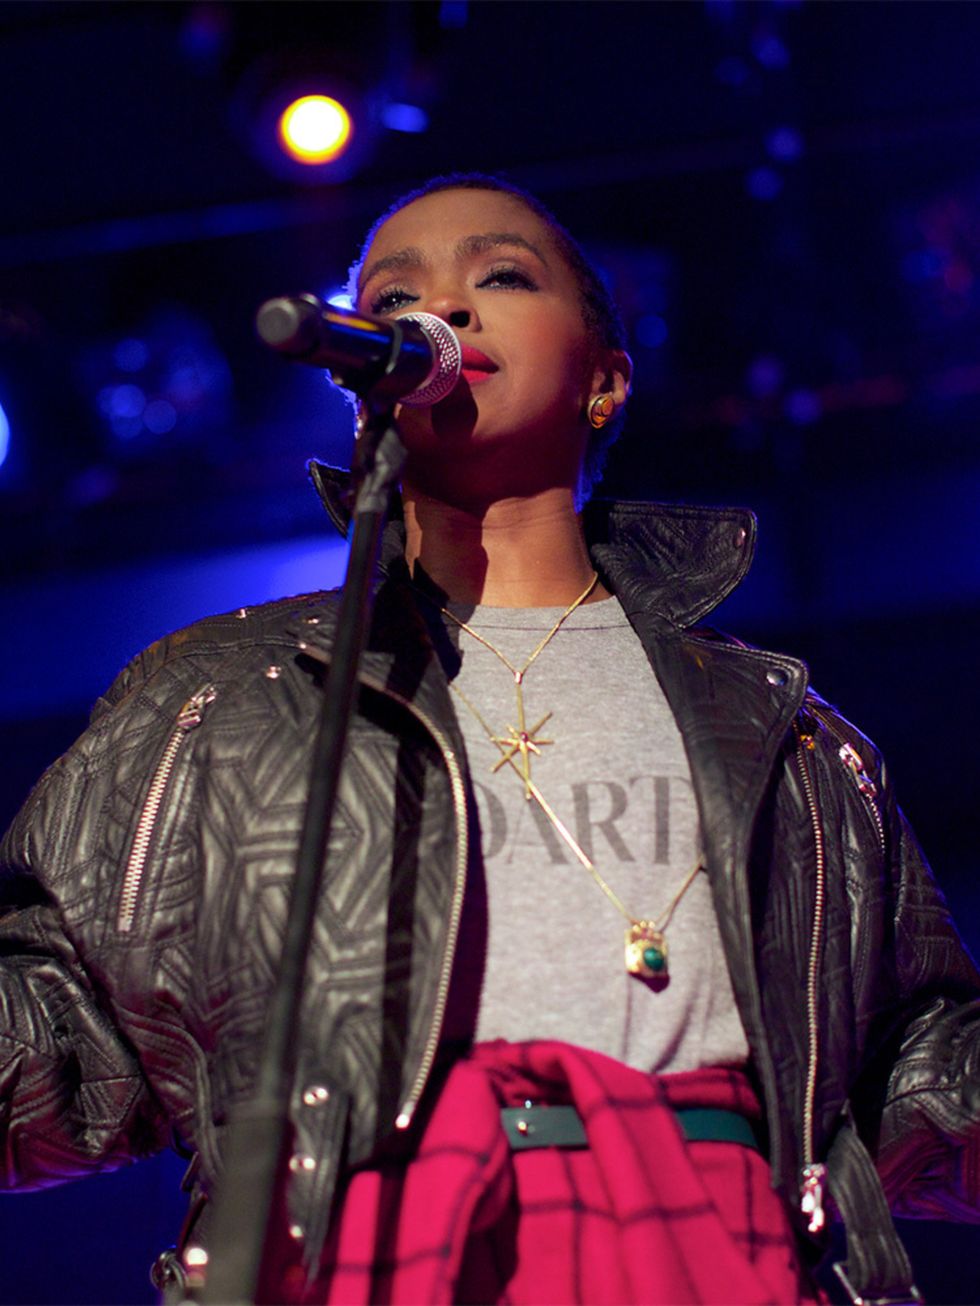 <p><strong>MUSIC: Lauryn Hill</strong></p>

<p>Do not miss former Fugees member and solo artist Lauryn Hill performing in London this weekend for the first time in over two years.</p>

<p>An evening with the formidable Ms. Hill, well-known for her talent 